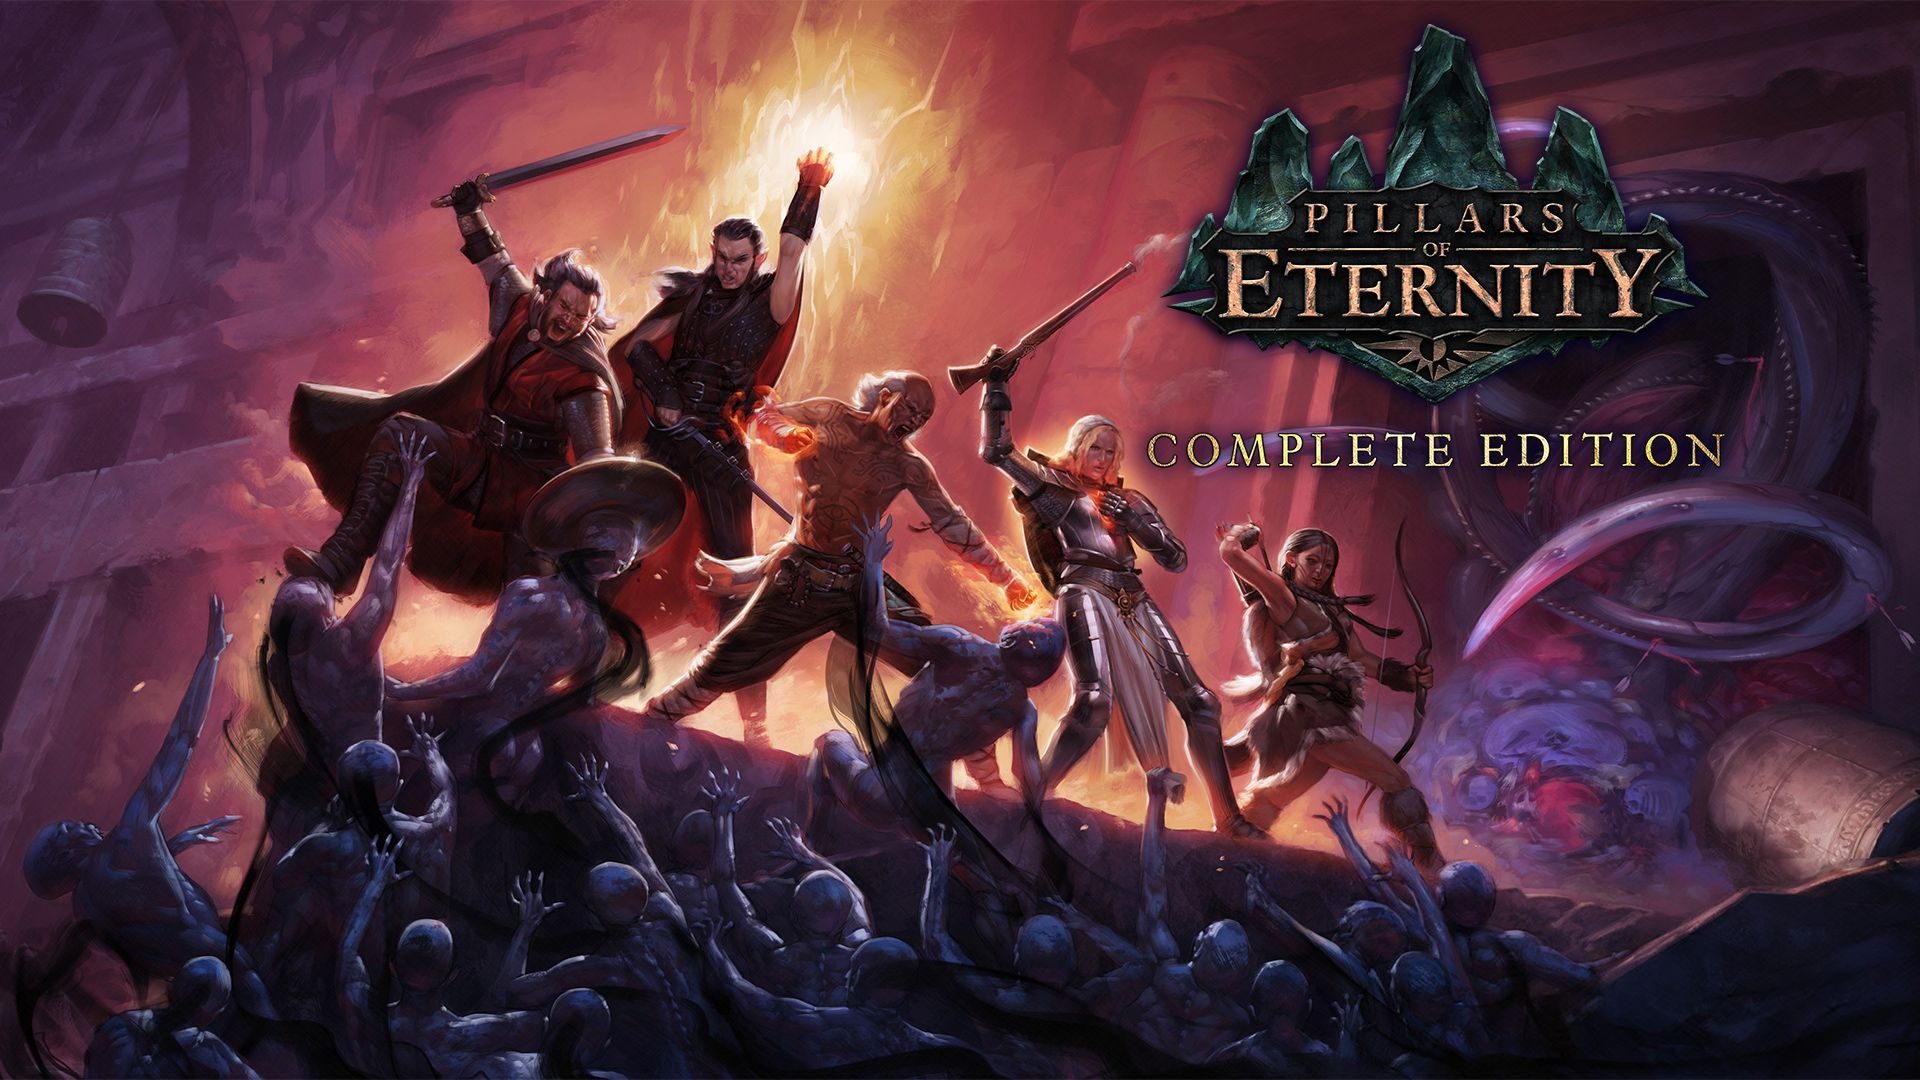 Pillars of Eternity: Complete Edition for Nintendo Switch Game Details